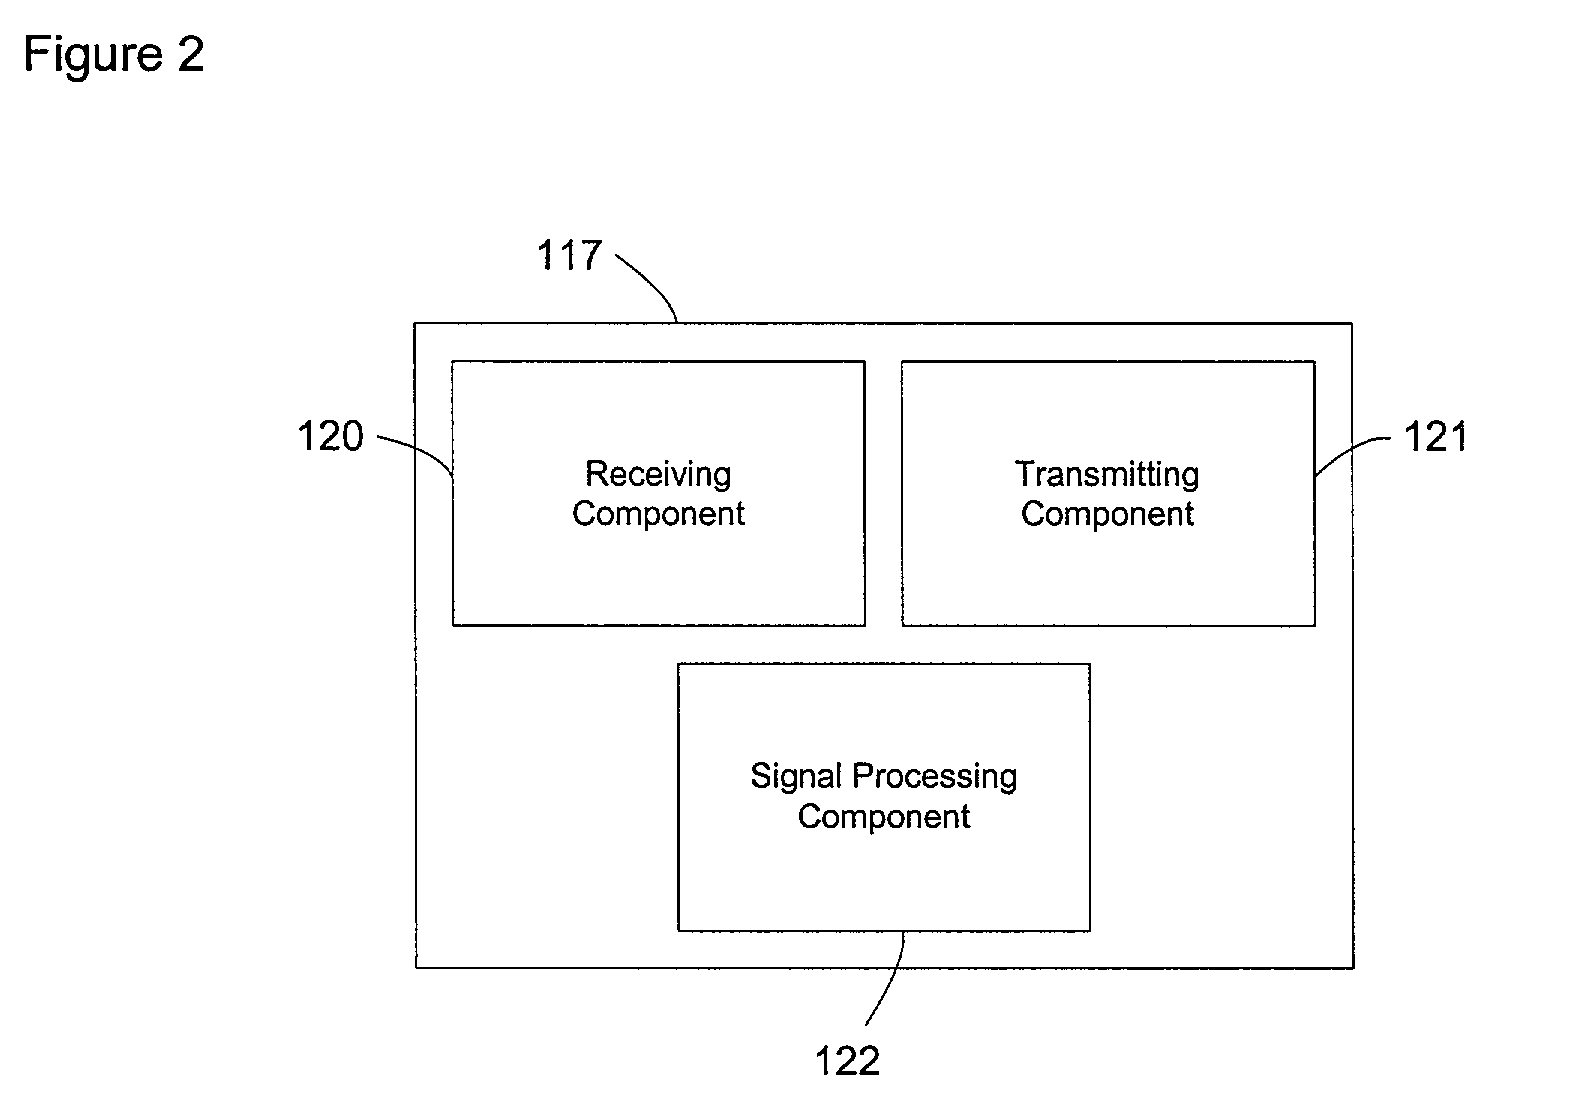 Centralized coordination point for wireless communication devices using multiple protocols